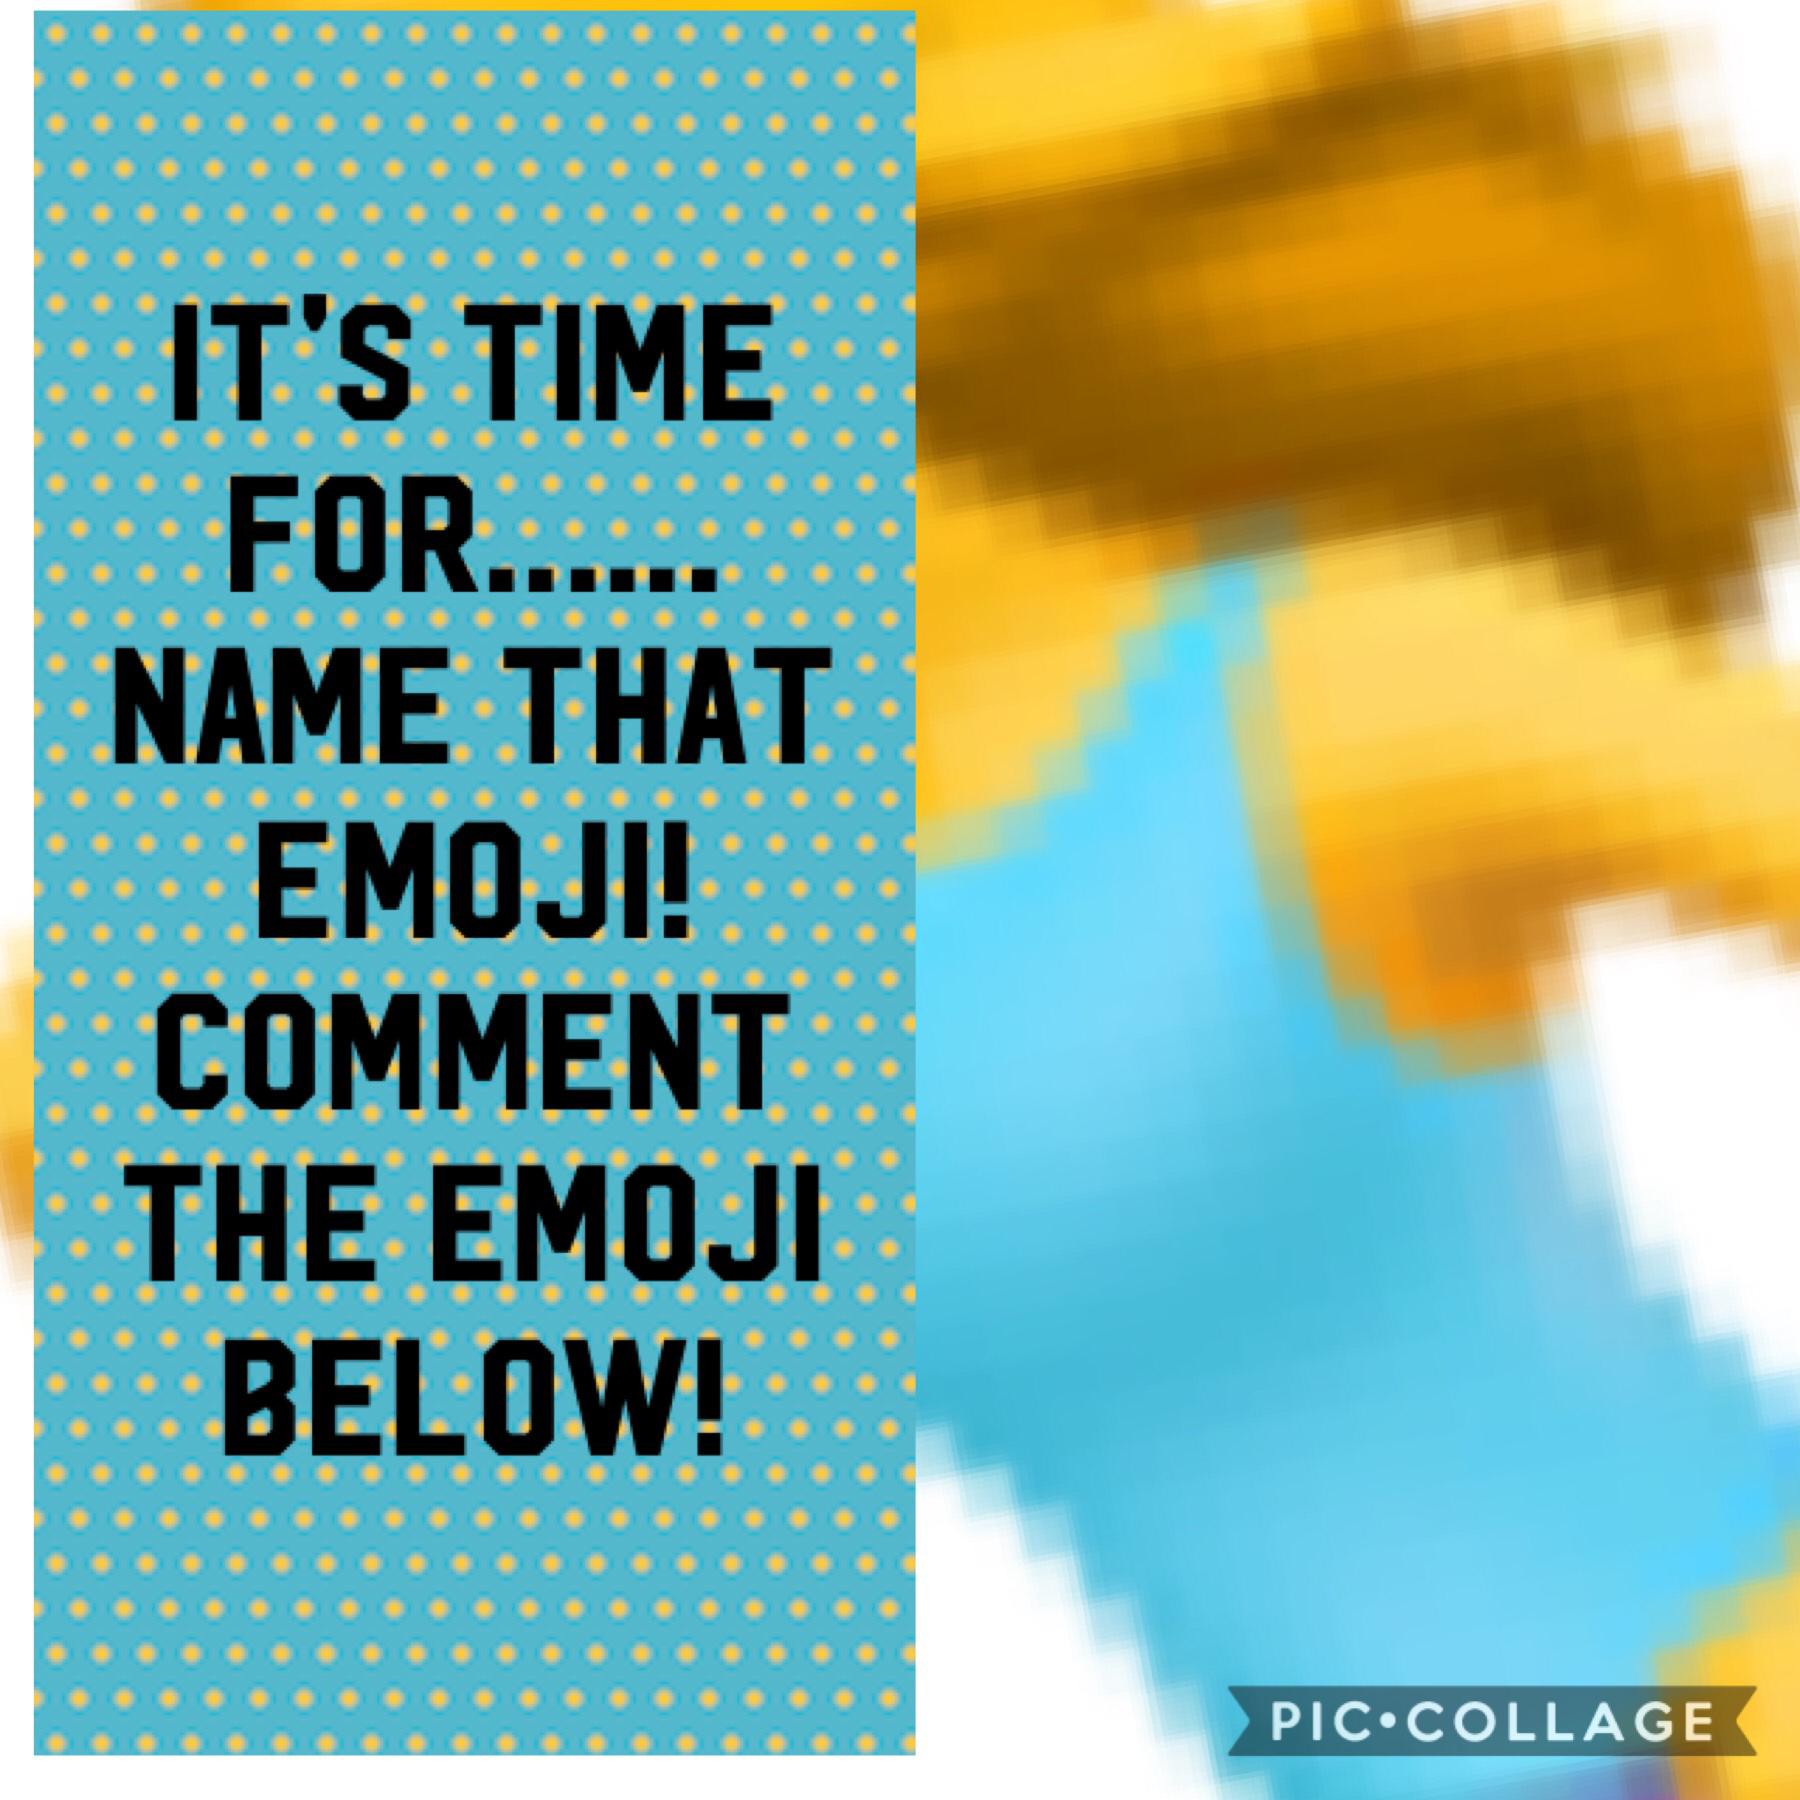 TAP!
I realized that it showed the emoji down below so this time I'm going to just type the actual emoji so people can't cheat, not saying you will.